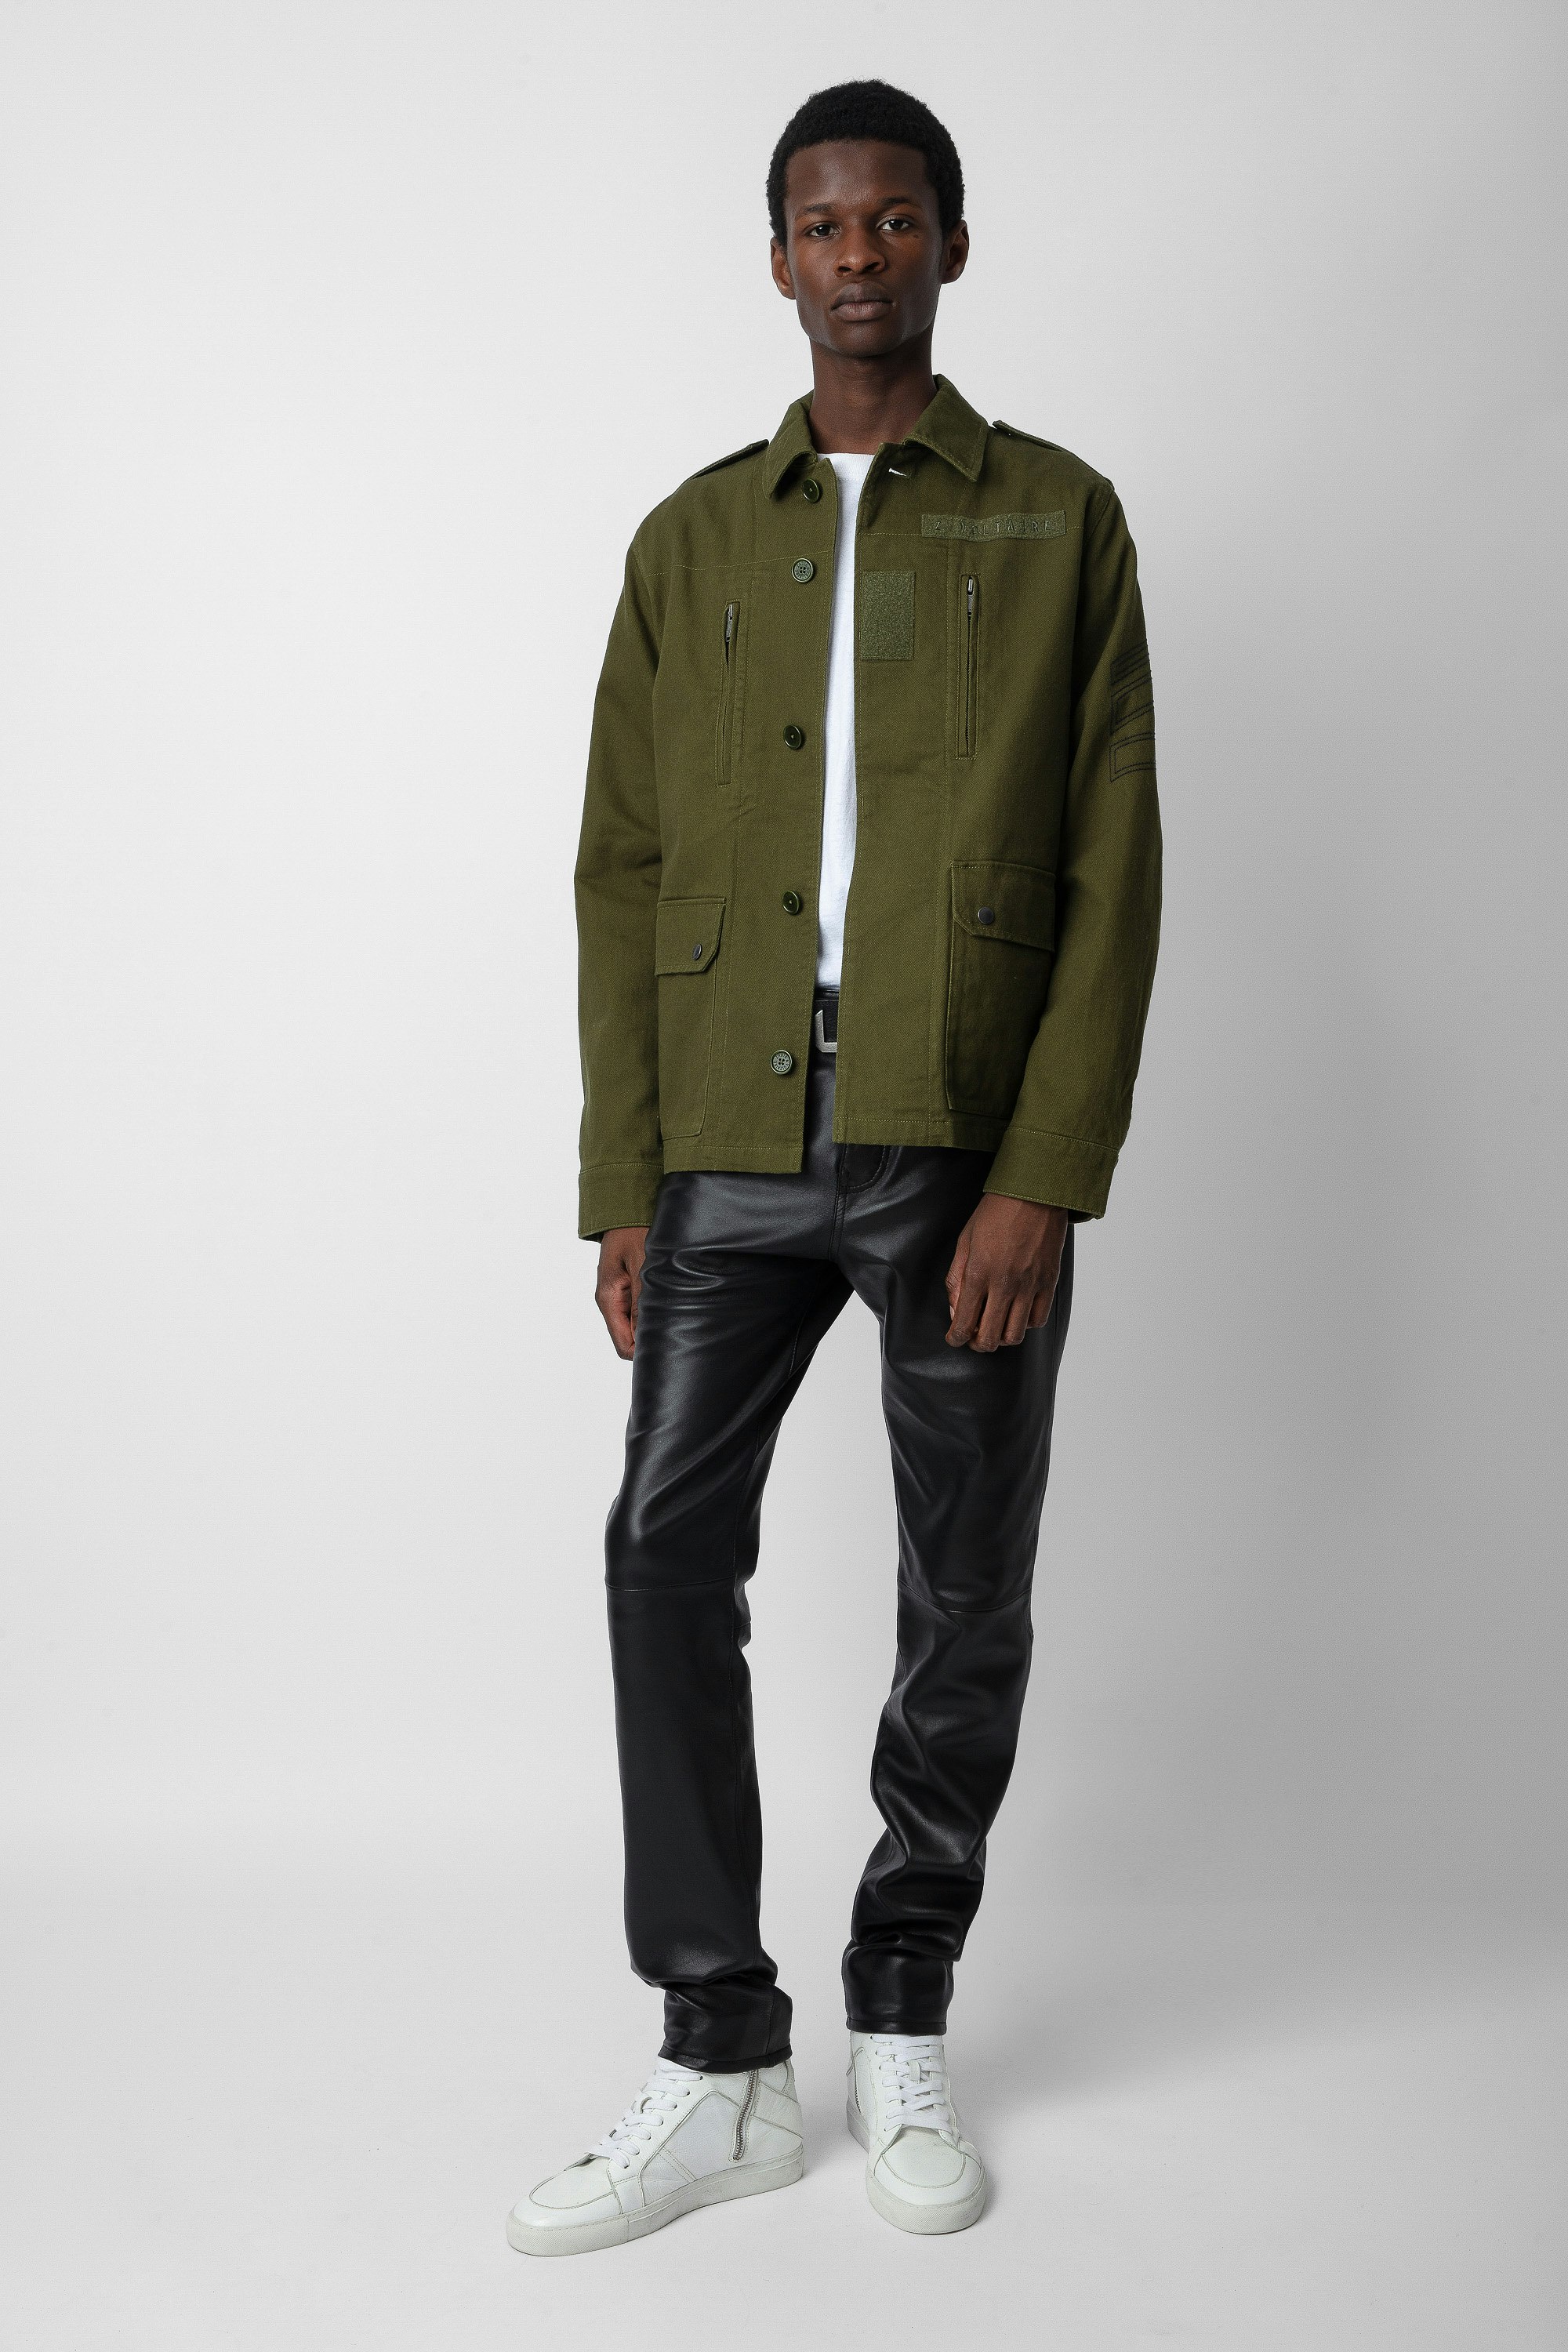 Kido Jacket - Men’s khaki cotton jacket with the slogan “Art is truth” on the back.